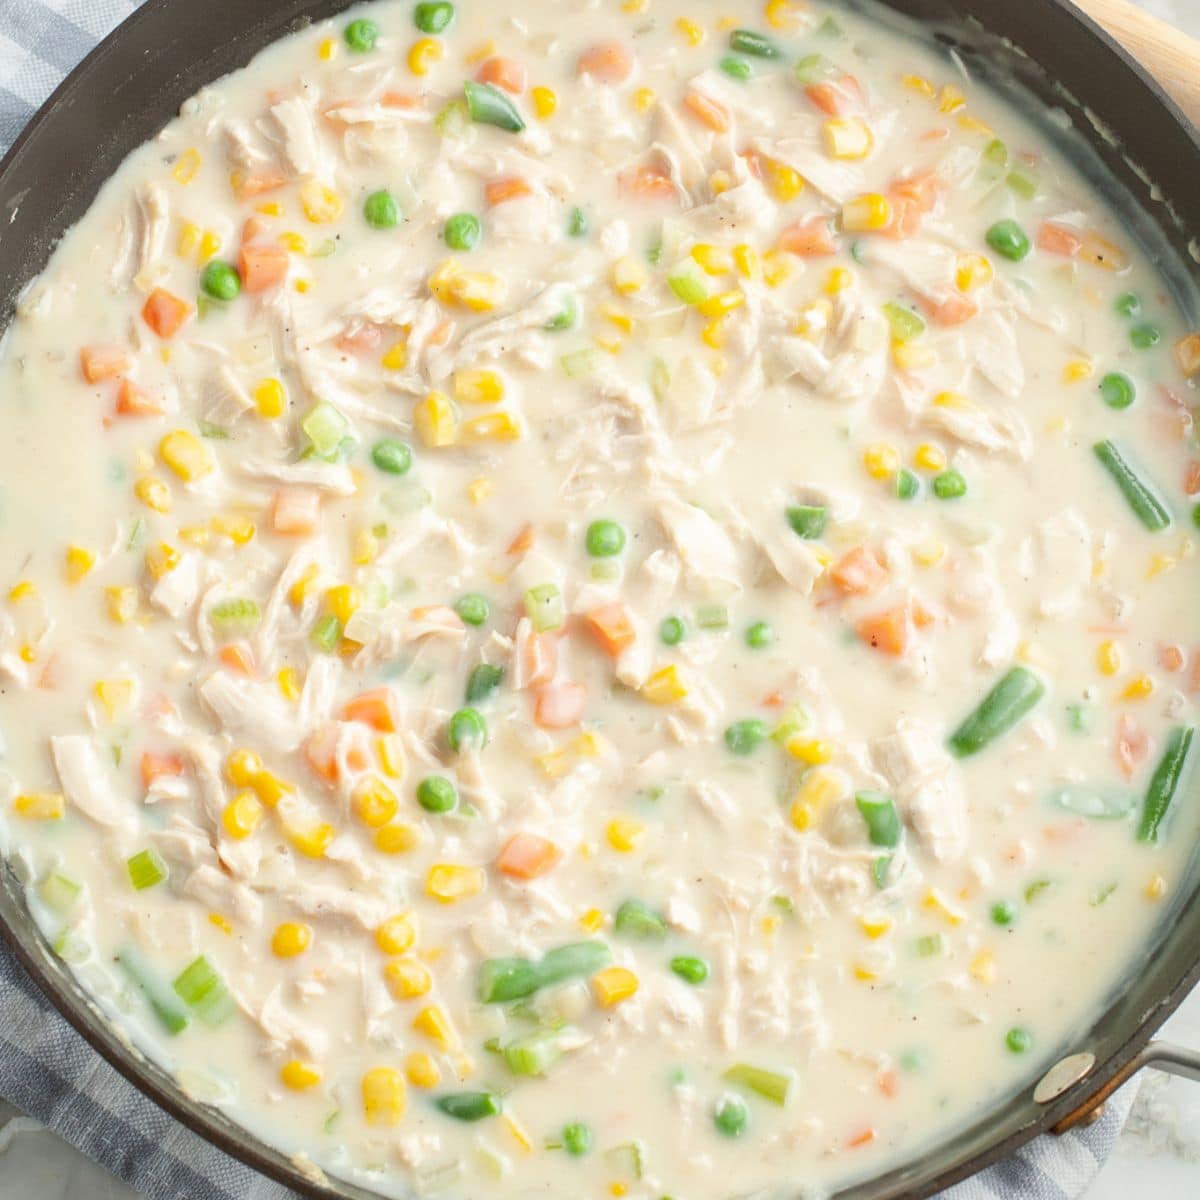 Skillet with chicken pot pie filling.